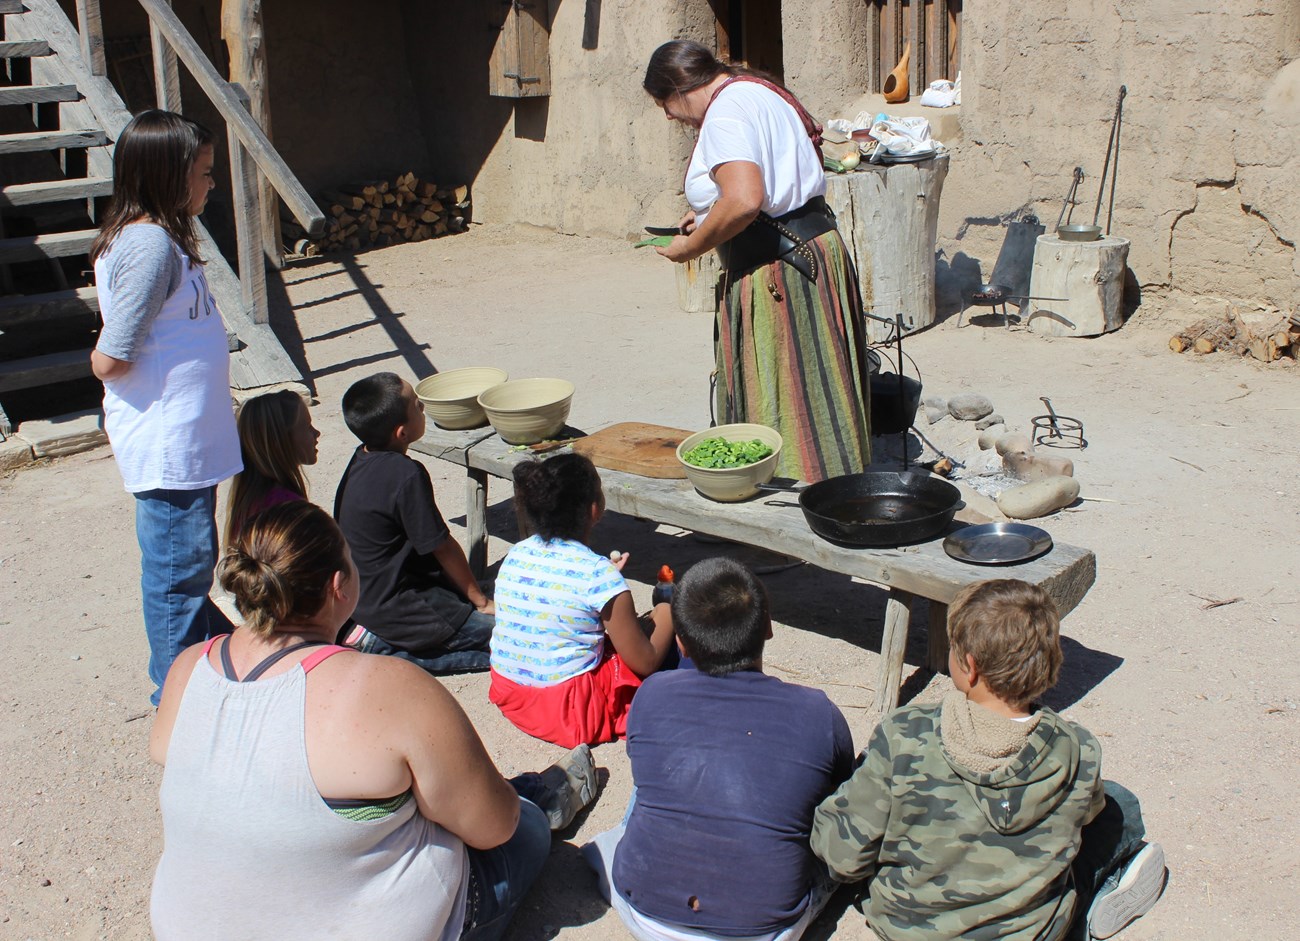 Children watch a costumed volunteer conduct a cooking demonstration